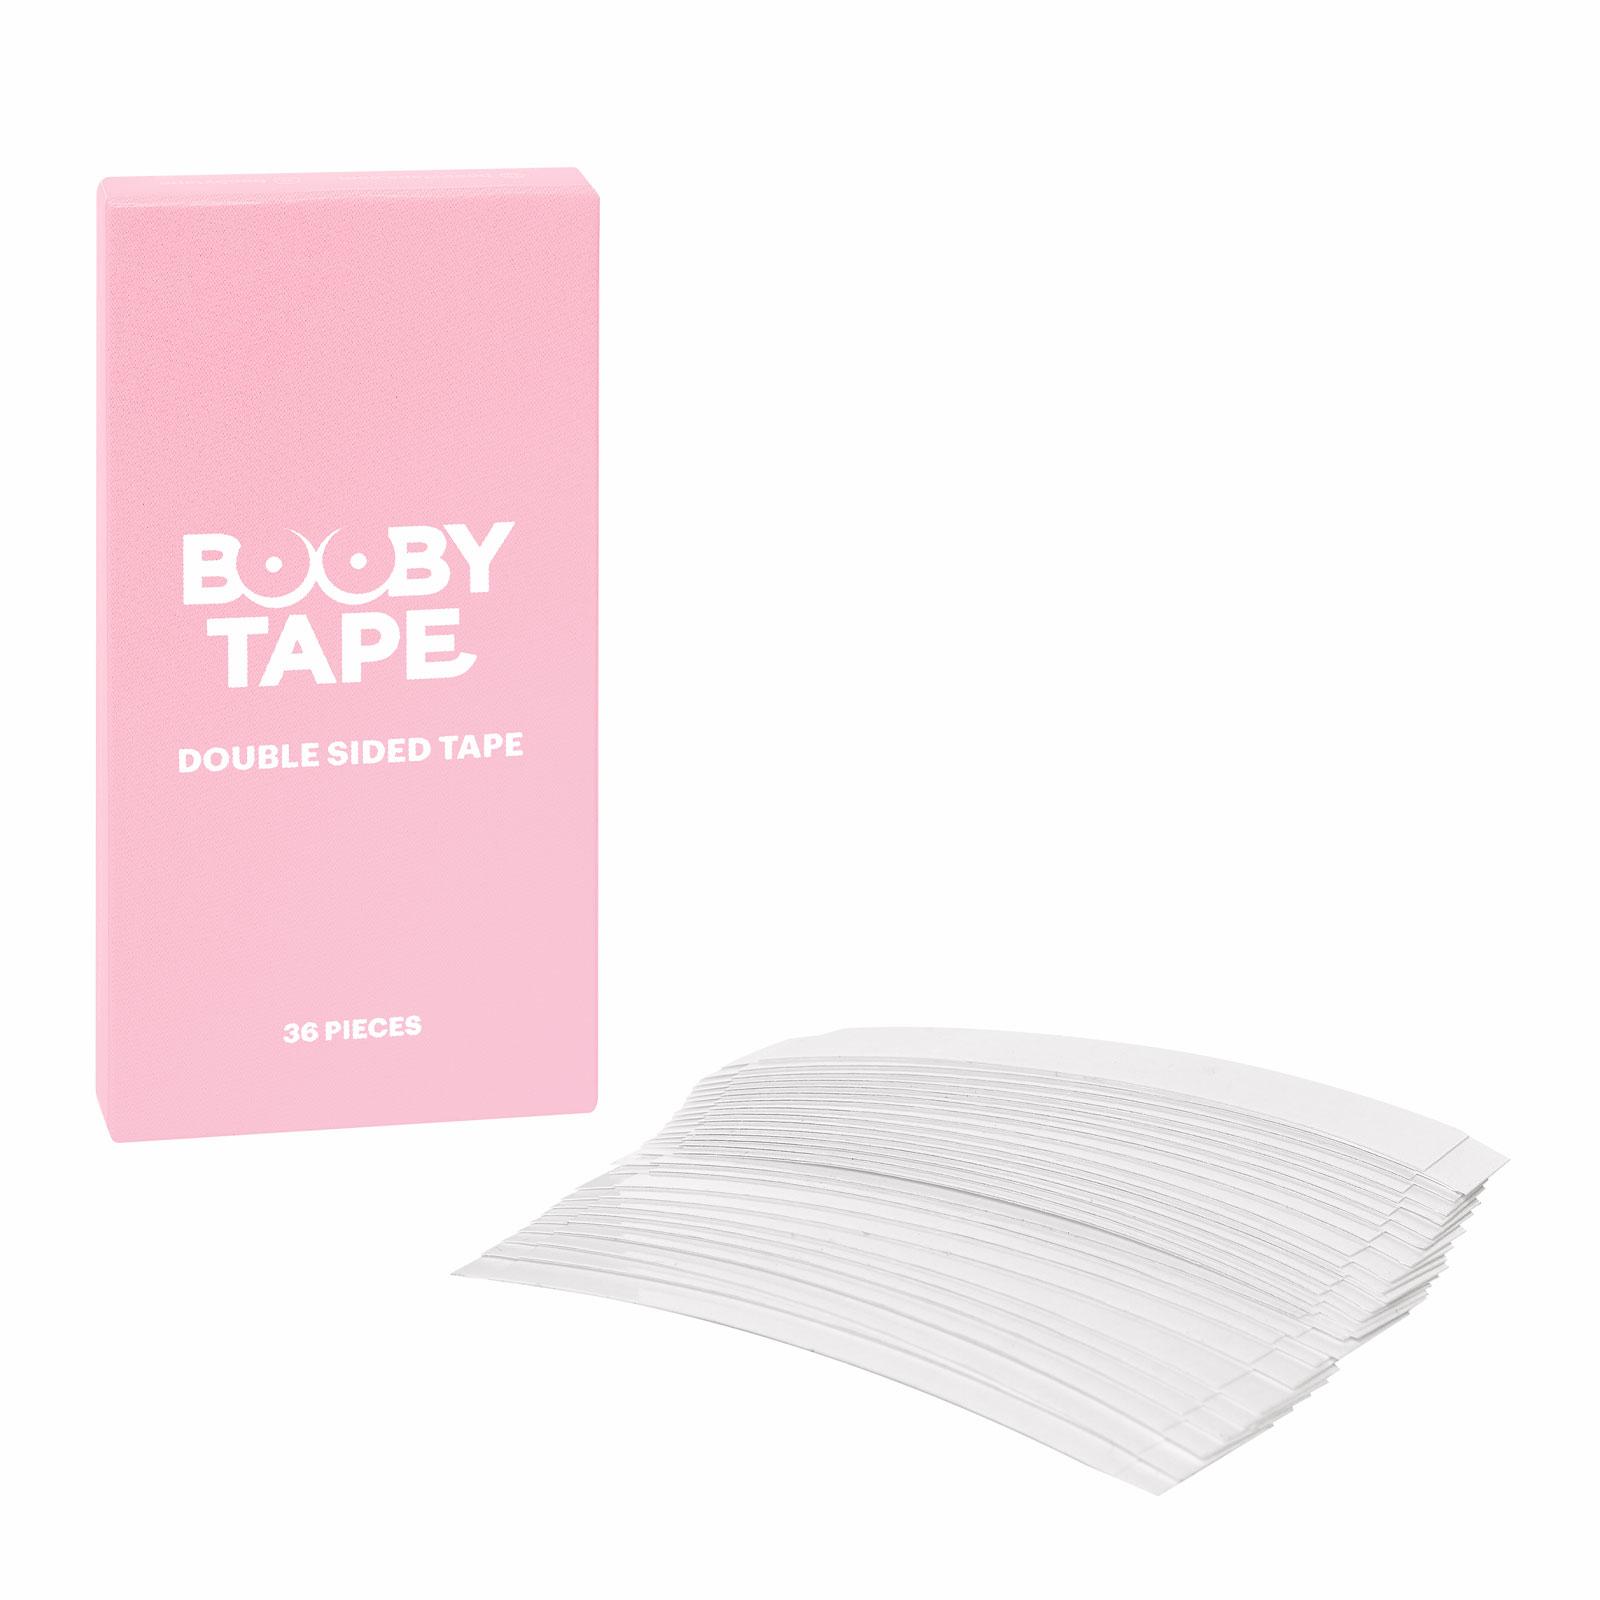 Booby Tape Double Sided Tape 36 Pieces | SEPHORA UK